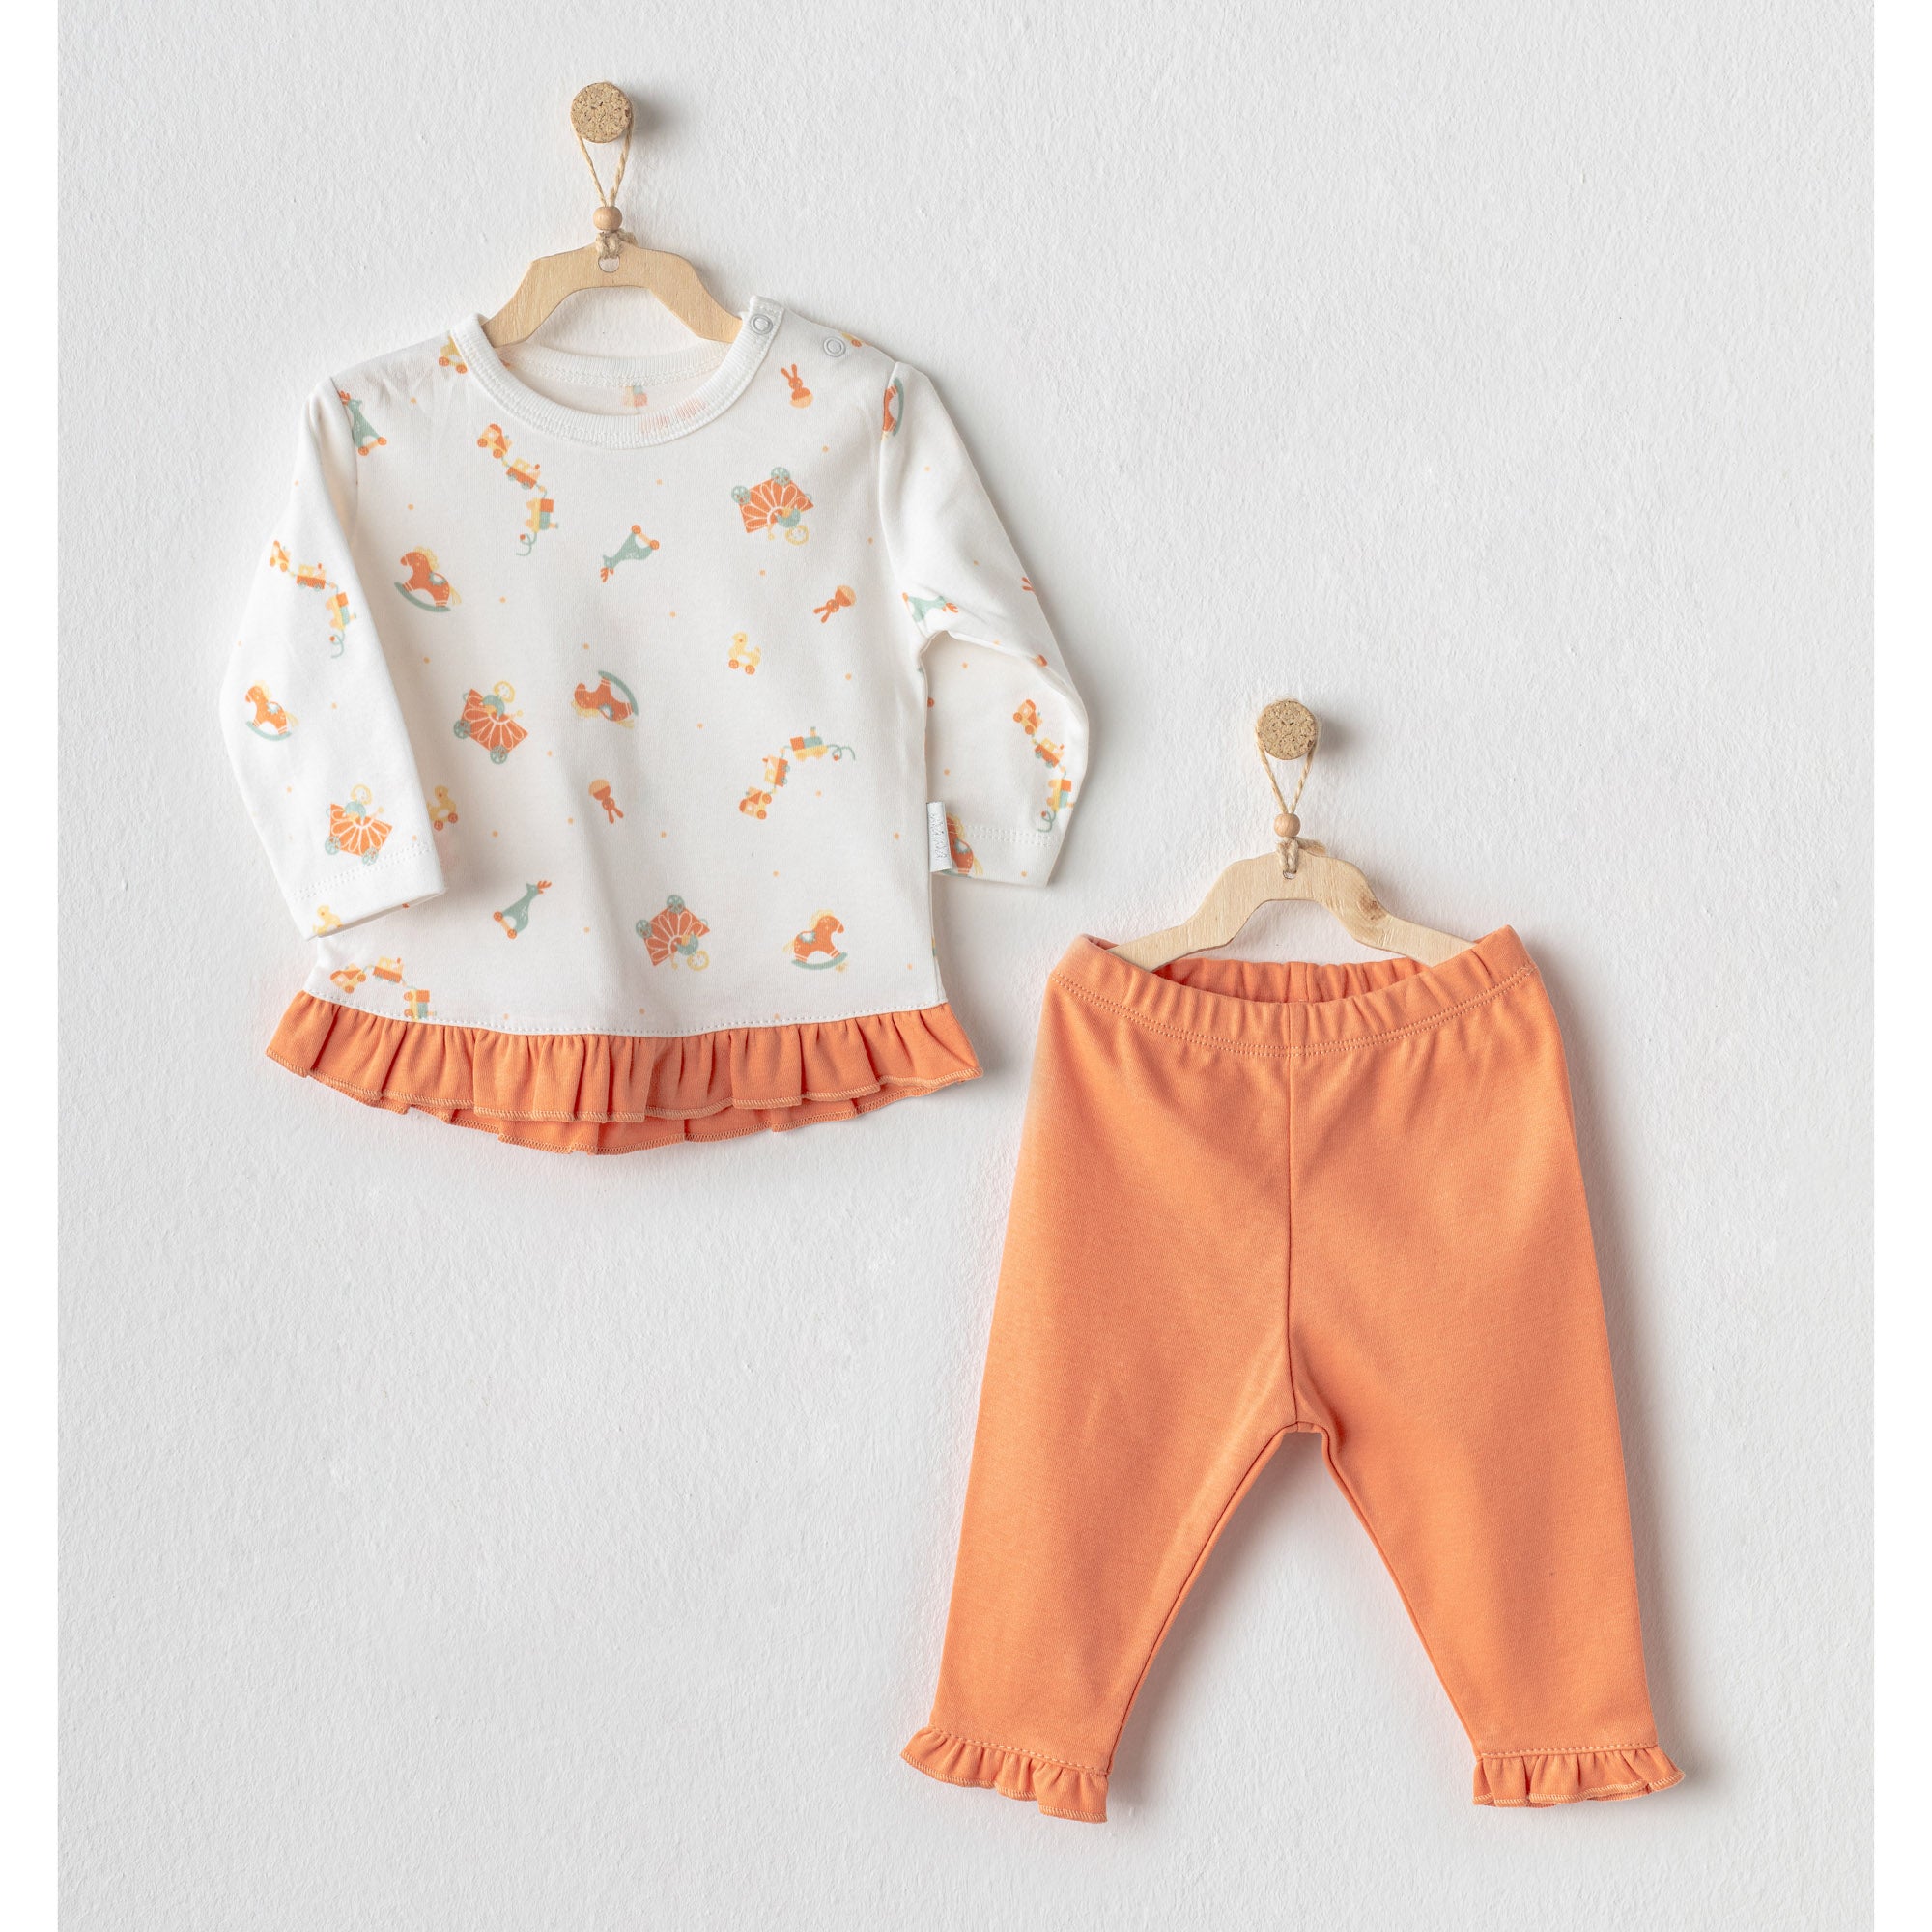 Cute Playmate Cotton Comfy Set - Cute Playmate Cotton Comfy Set - 1-3 Months - Andywawa - Melymod